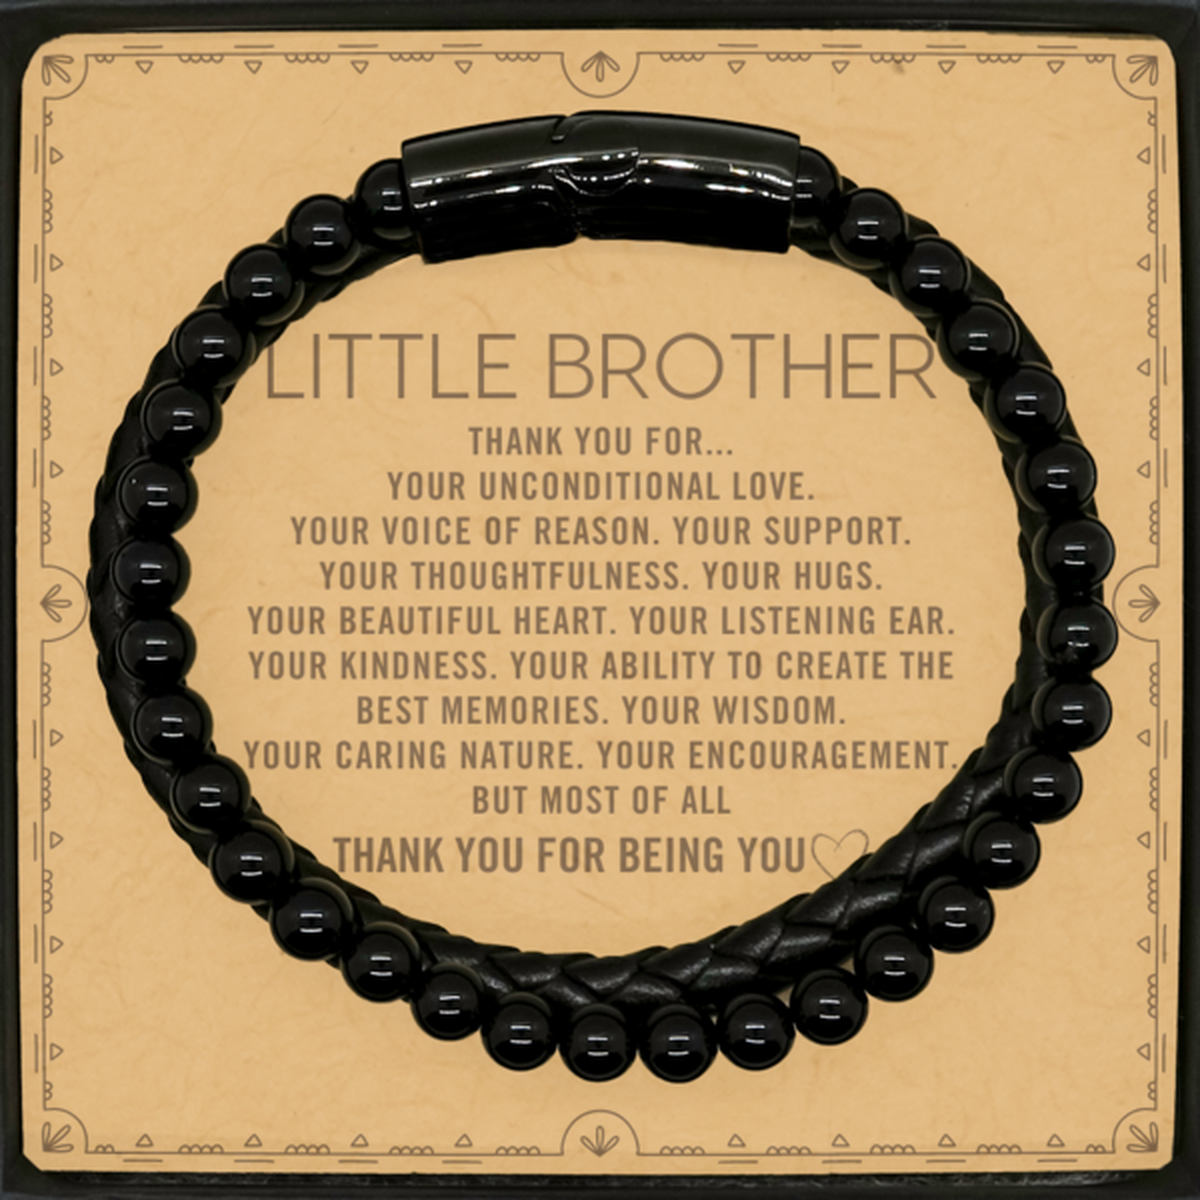 Little Brother Stone Leather Bracelets Custom, Message Card Gifts For Little Brother Christmas Graduation Birthday Gifts for Men Women Little Brother Thank you for Your unconditional love